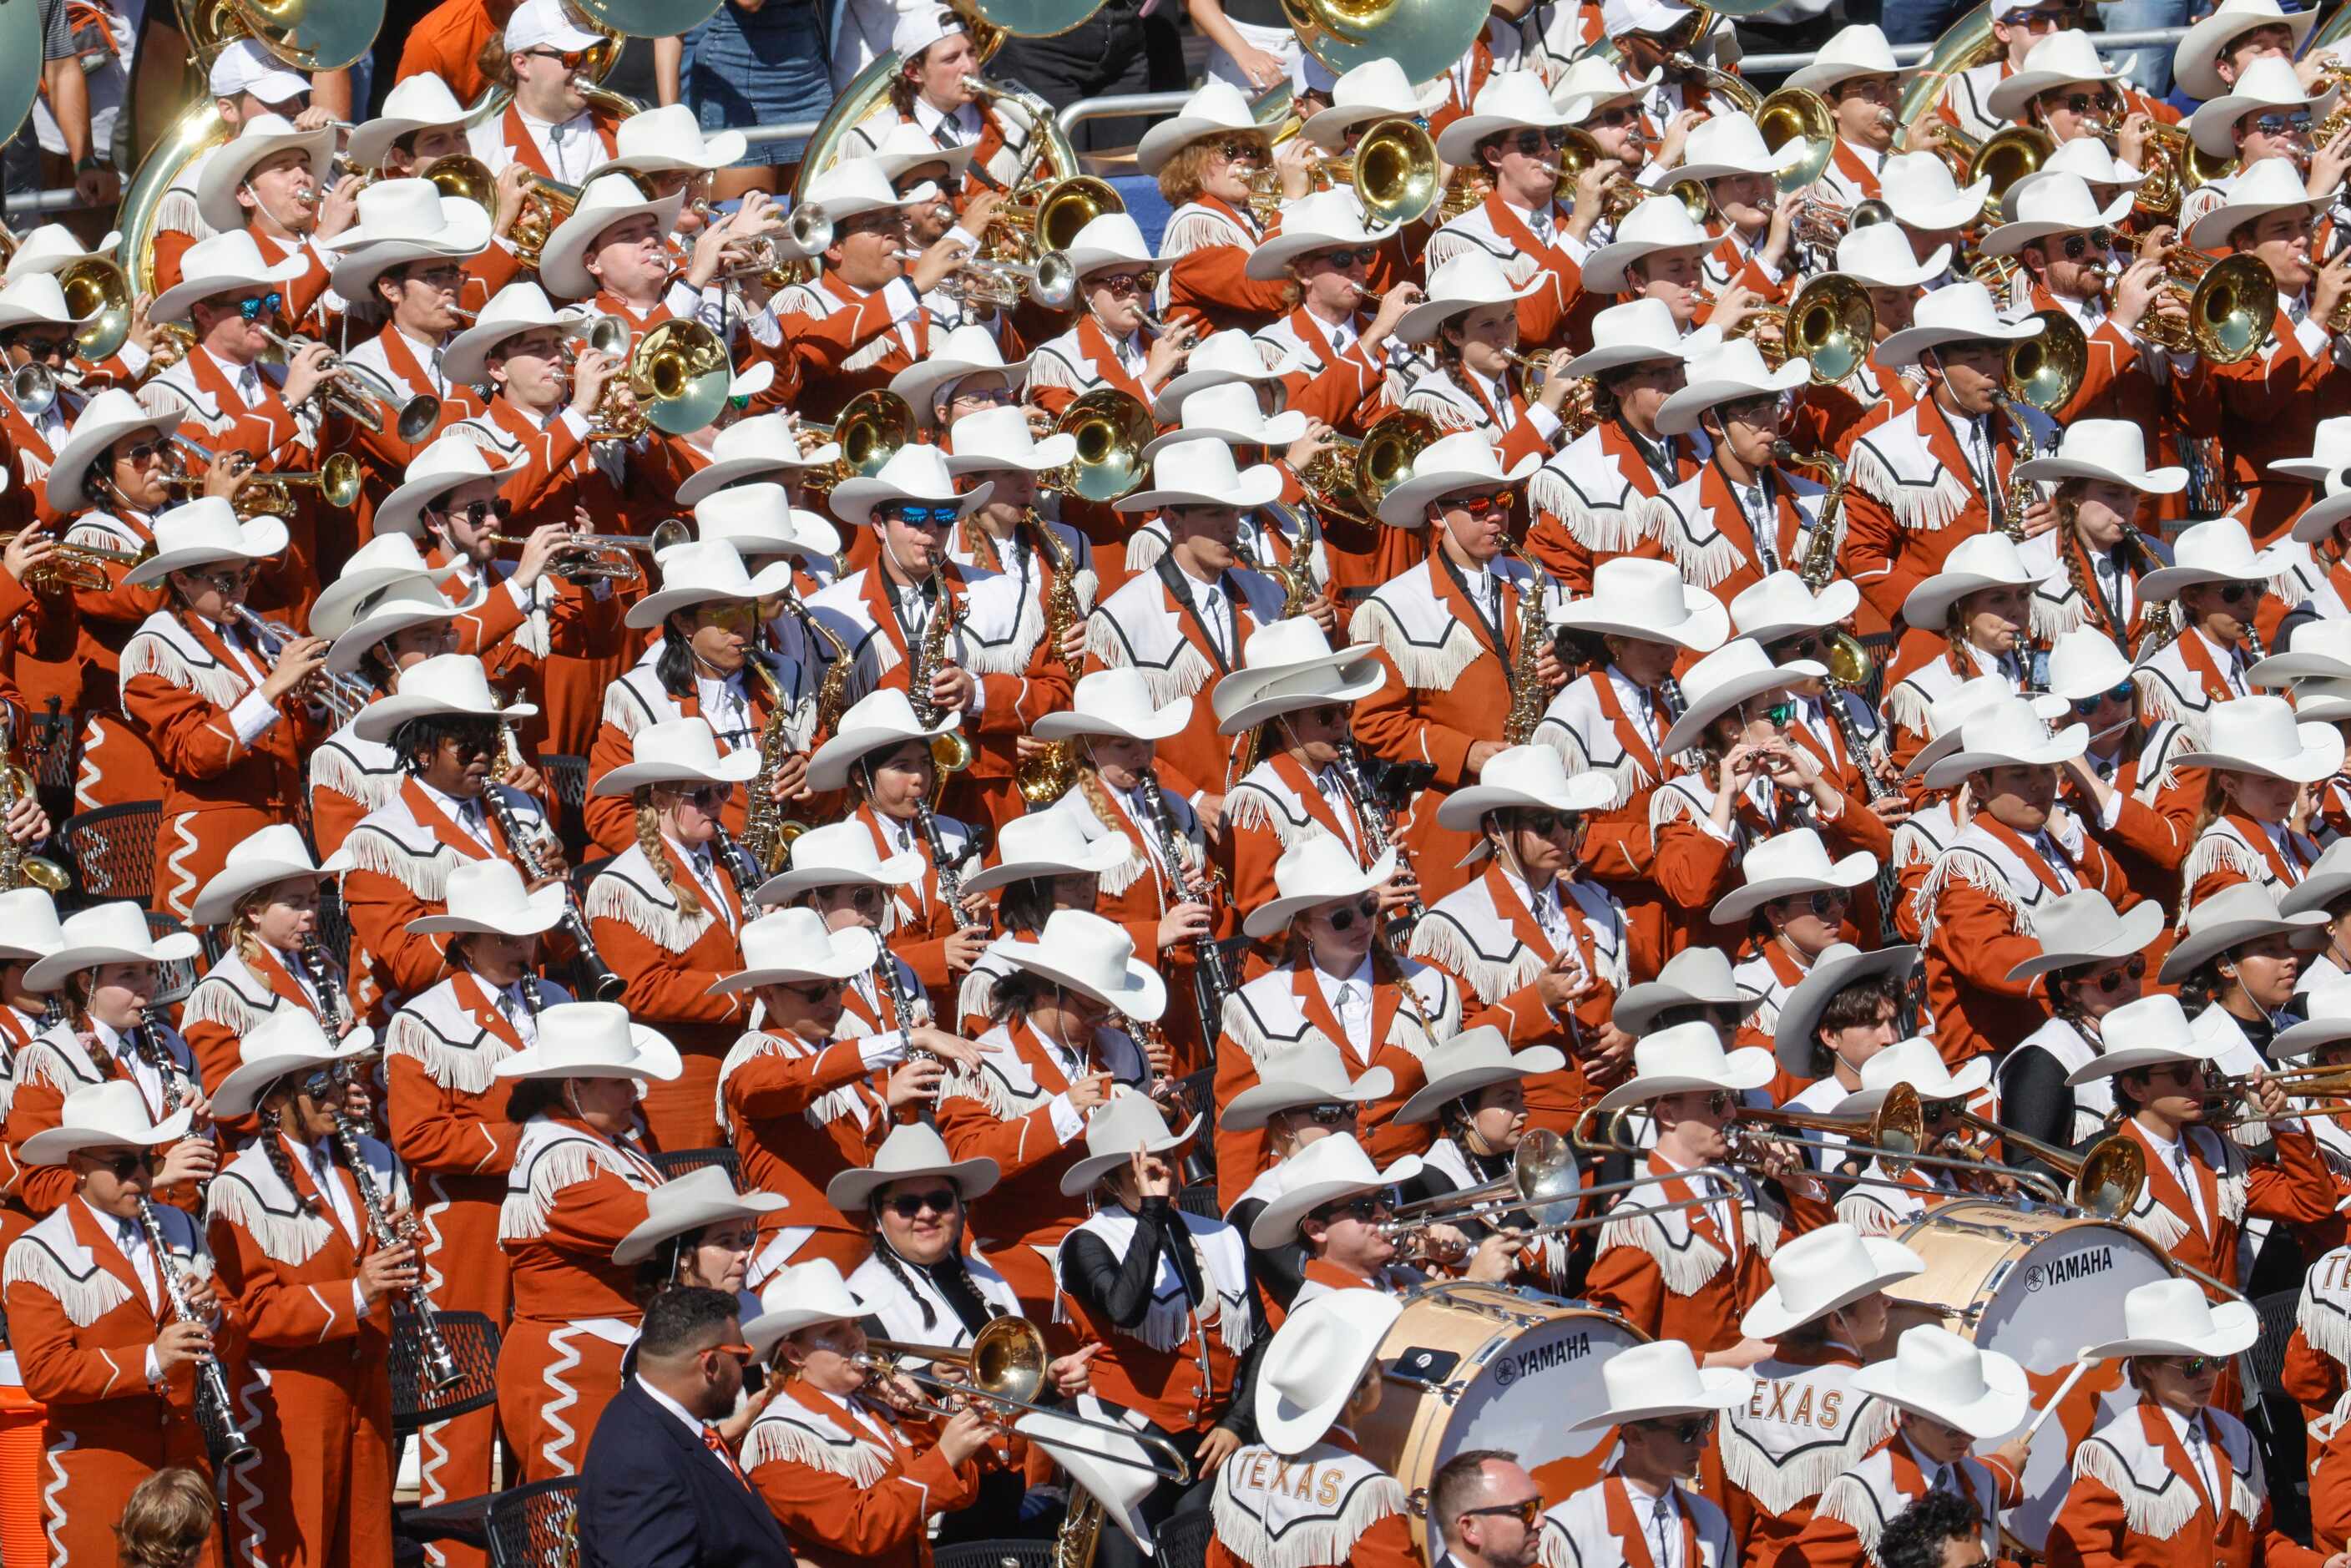 During the Red River Showdown at the Cotton Bowl, on Saturday, Oct. 7, 2023, in Dallas.